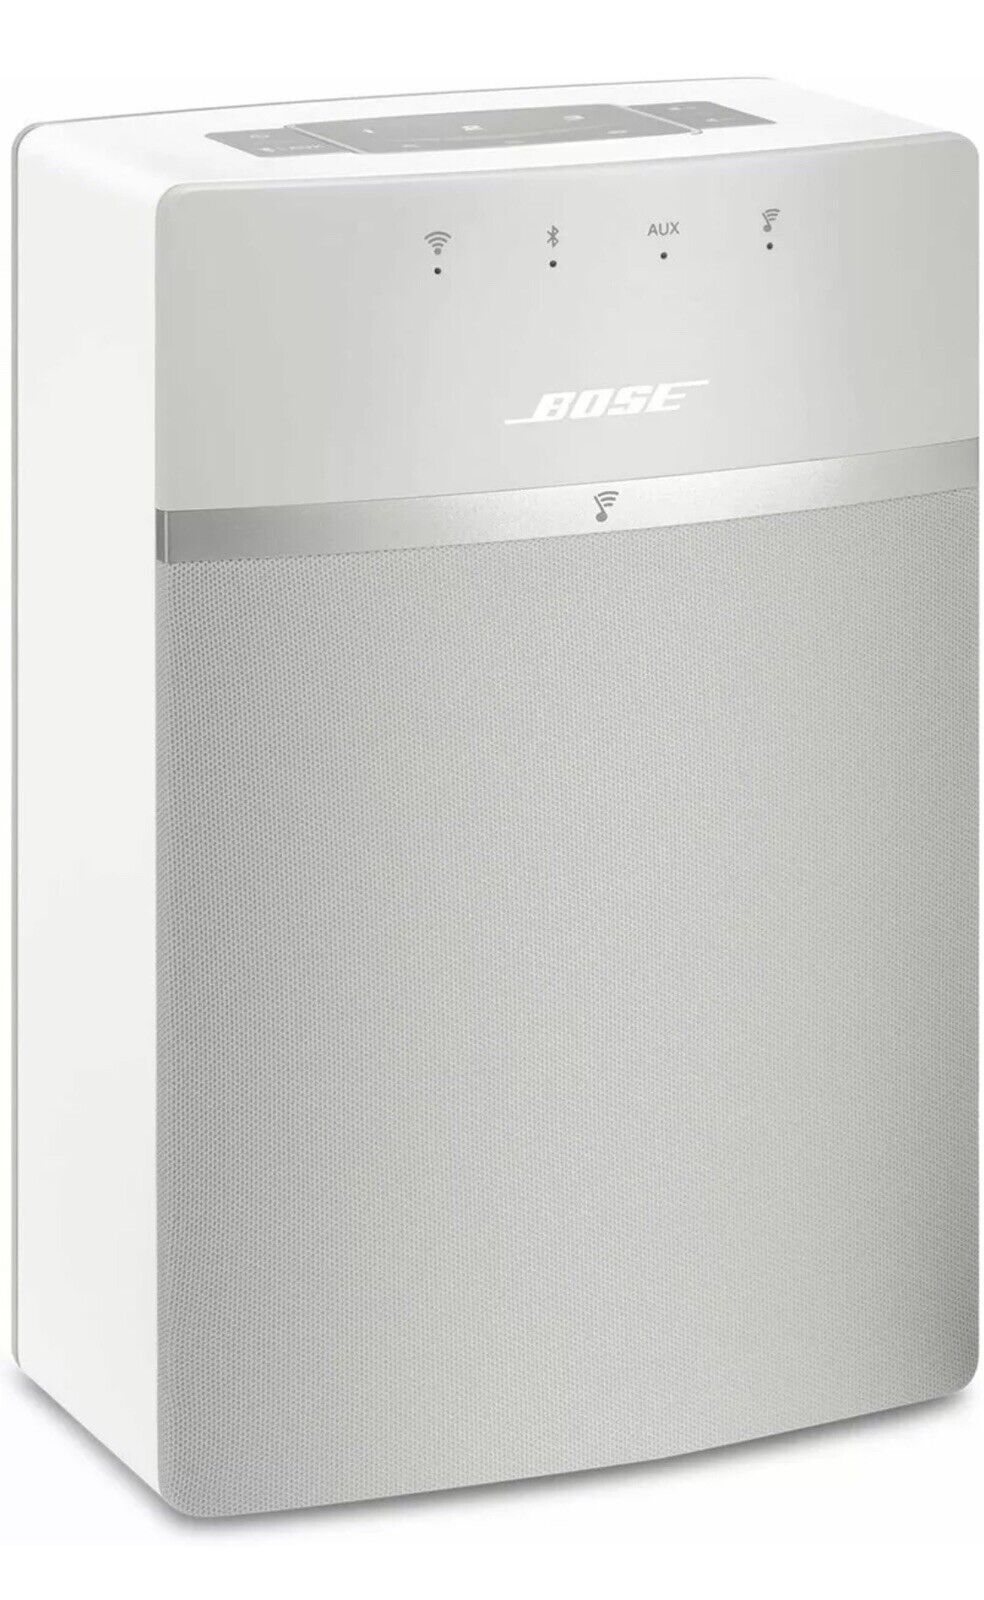 Bose SoundTouch 10 Wireless Music System - White for sale online 